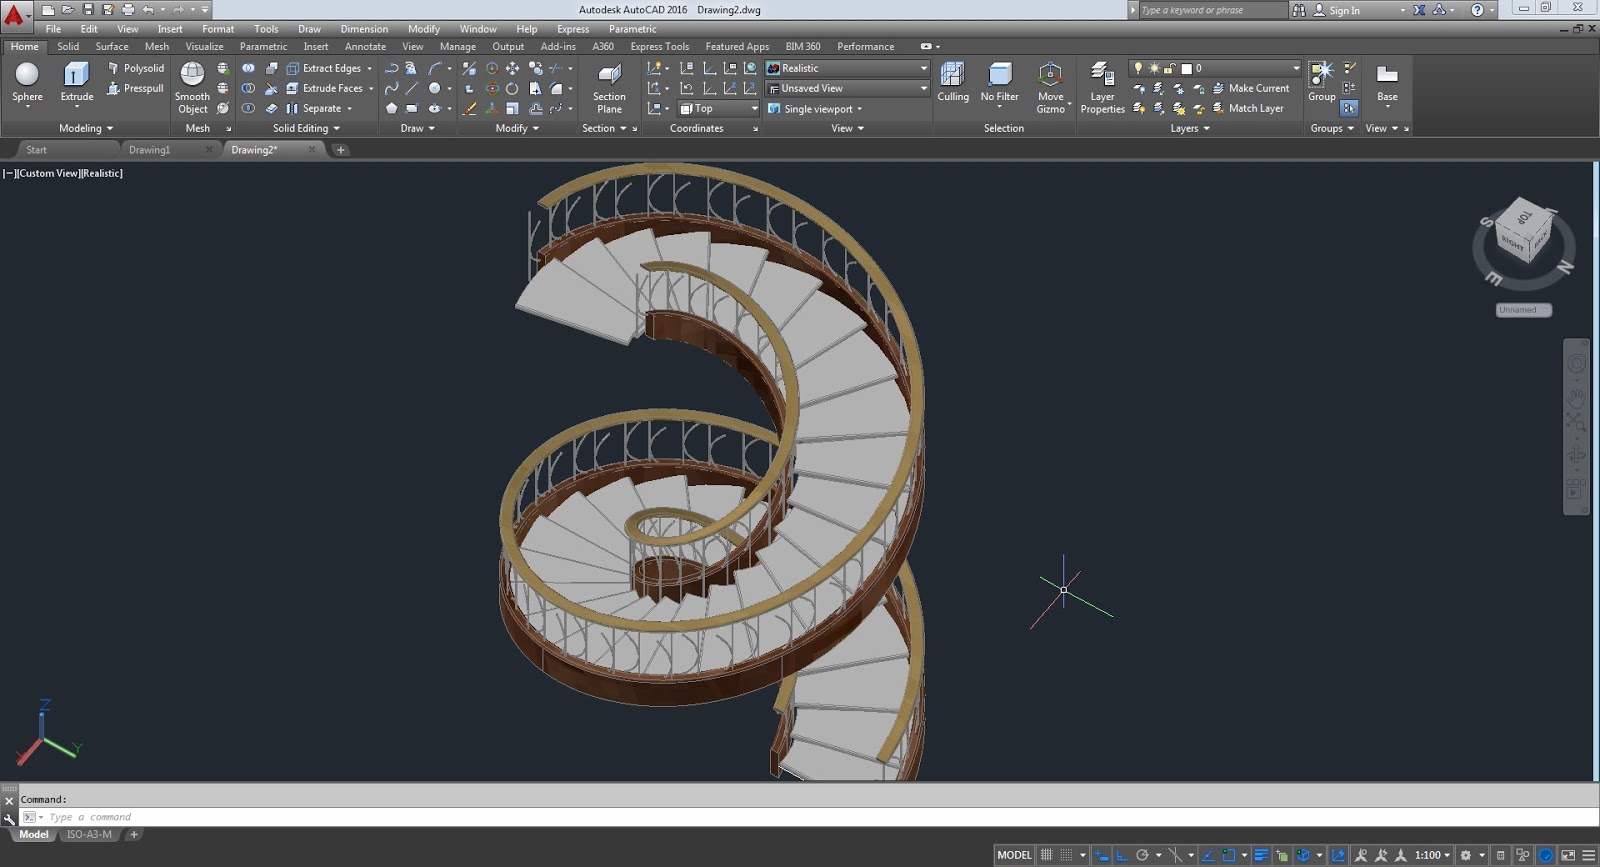 how to crack autocad 2016 trial version